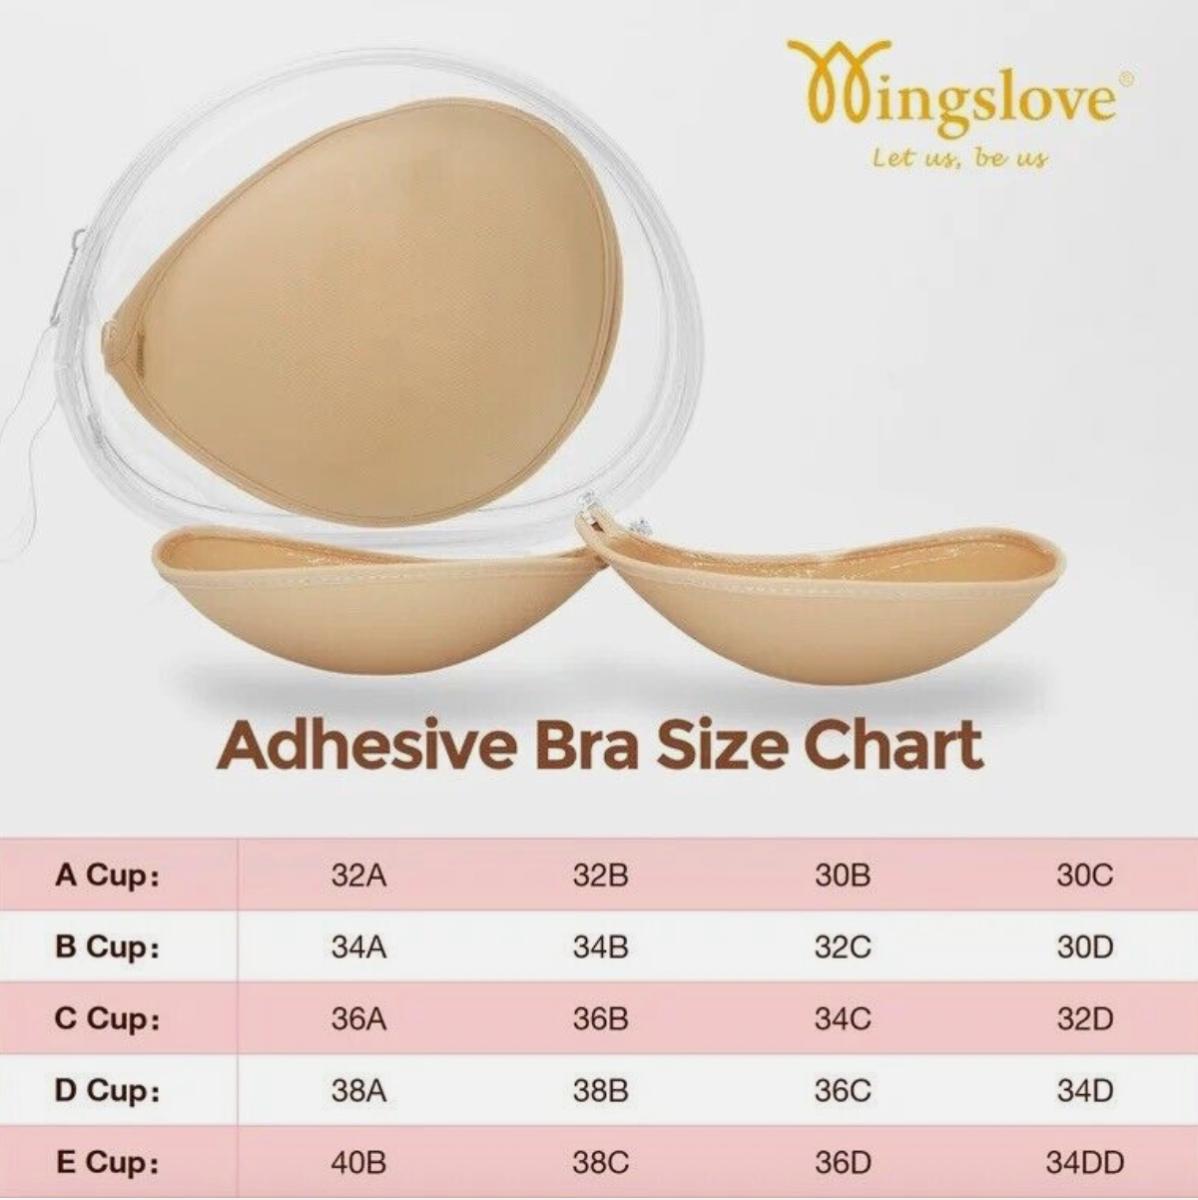 20 x Wingslove Self Adhesive Bras Size A in Natural Flipper